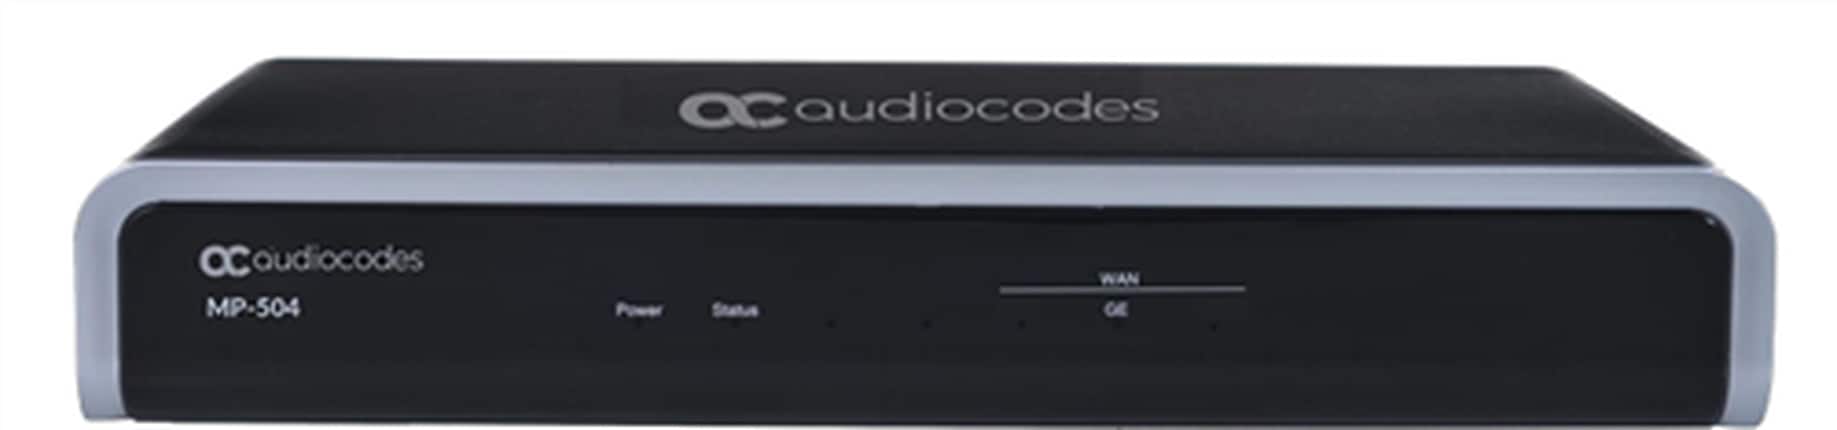 AudioCodes MediaPack 508 Analog VoIP Gateway with 8 FXS Voice Interface